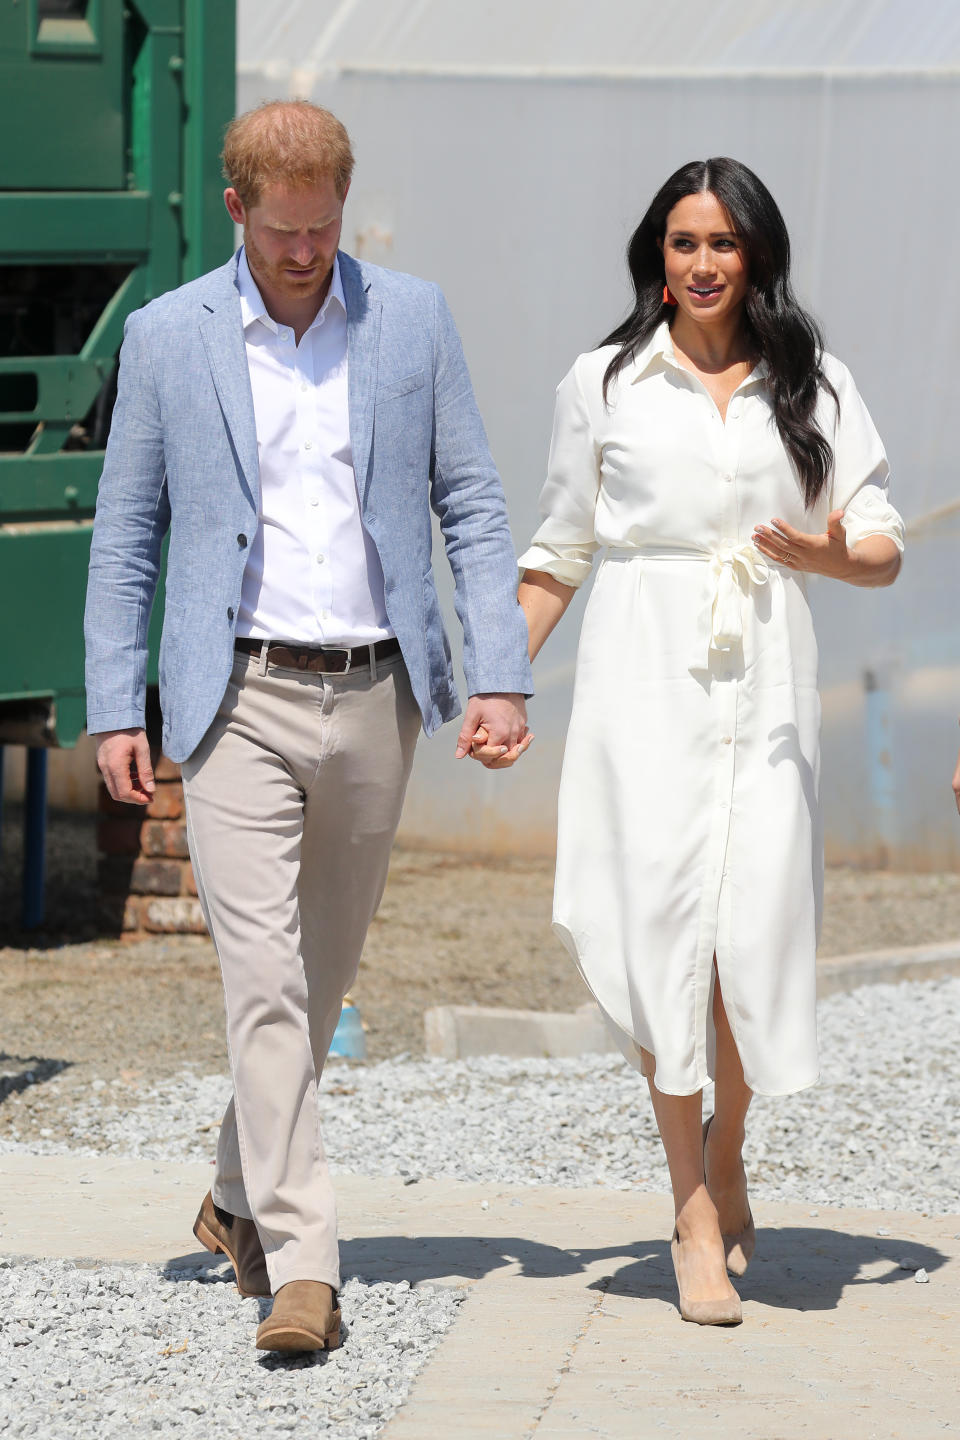 A white, belted shirt dress was the Duchess' outfit choice for her final day of royal tour engagements. She accessorised with a <a href="https://modesens.com/product/madewell-stone-%2526-tassel-earrings-purple-12976633/?refinfo=gSH_ggfMadewfa-ApAcJeEa12976633&utm_source=google&utm_media=CPC&gclid=EAIaIQobChMIr7KVzK_95AIVTdTeCh138gcvEAkYASABEgJPU_D_BwE" rel="nofollow noopener" target="_blank" data-ylk="slk:pair of Madewell, orange tassels earrings" class="link ">pair of Madewell, orange tassels earrings</a> and <a href="https://www.stuartweitzman.com/products/leigh-95/" rel="nofollow noopener" target="_blank" data-ylk="slk:Stuart Weitzman heels" class="link ">Stuart Weitzman heels</a>. <em>[Photo: Getty Images]</em>